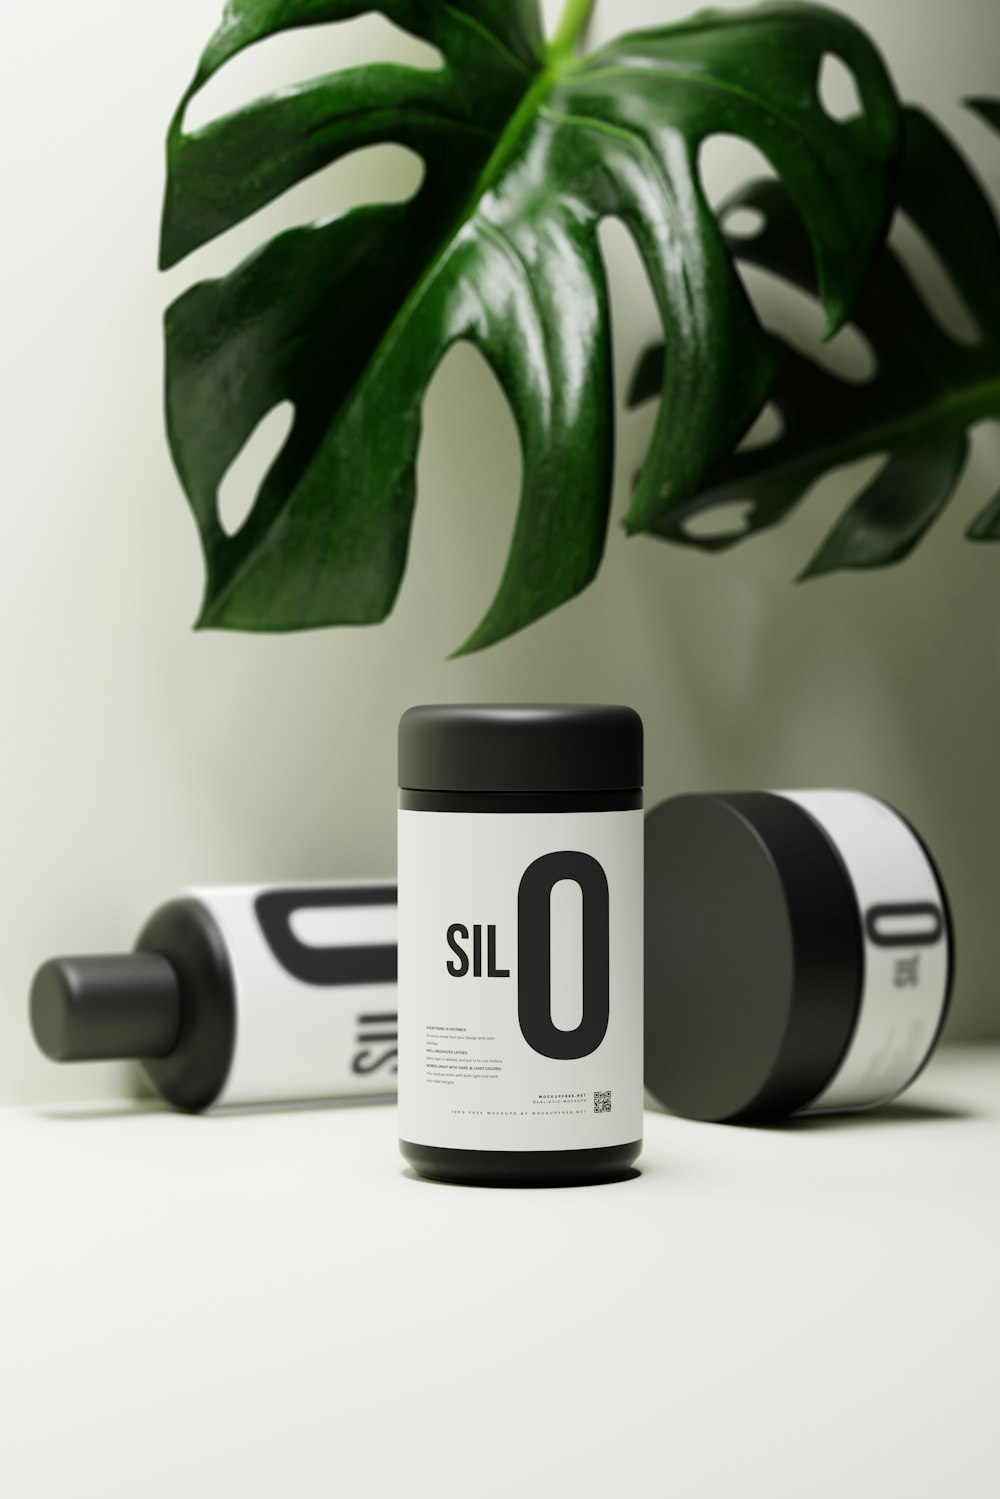 a bottle of sil 0 on a table next to a plant